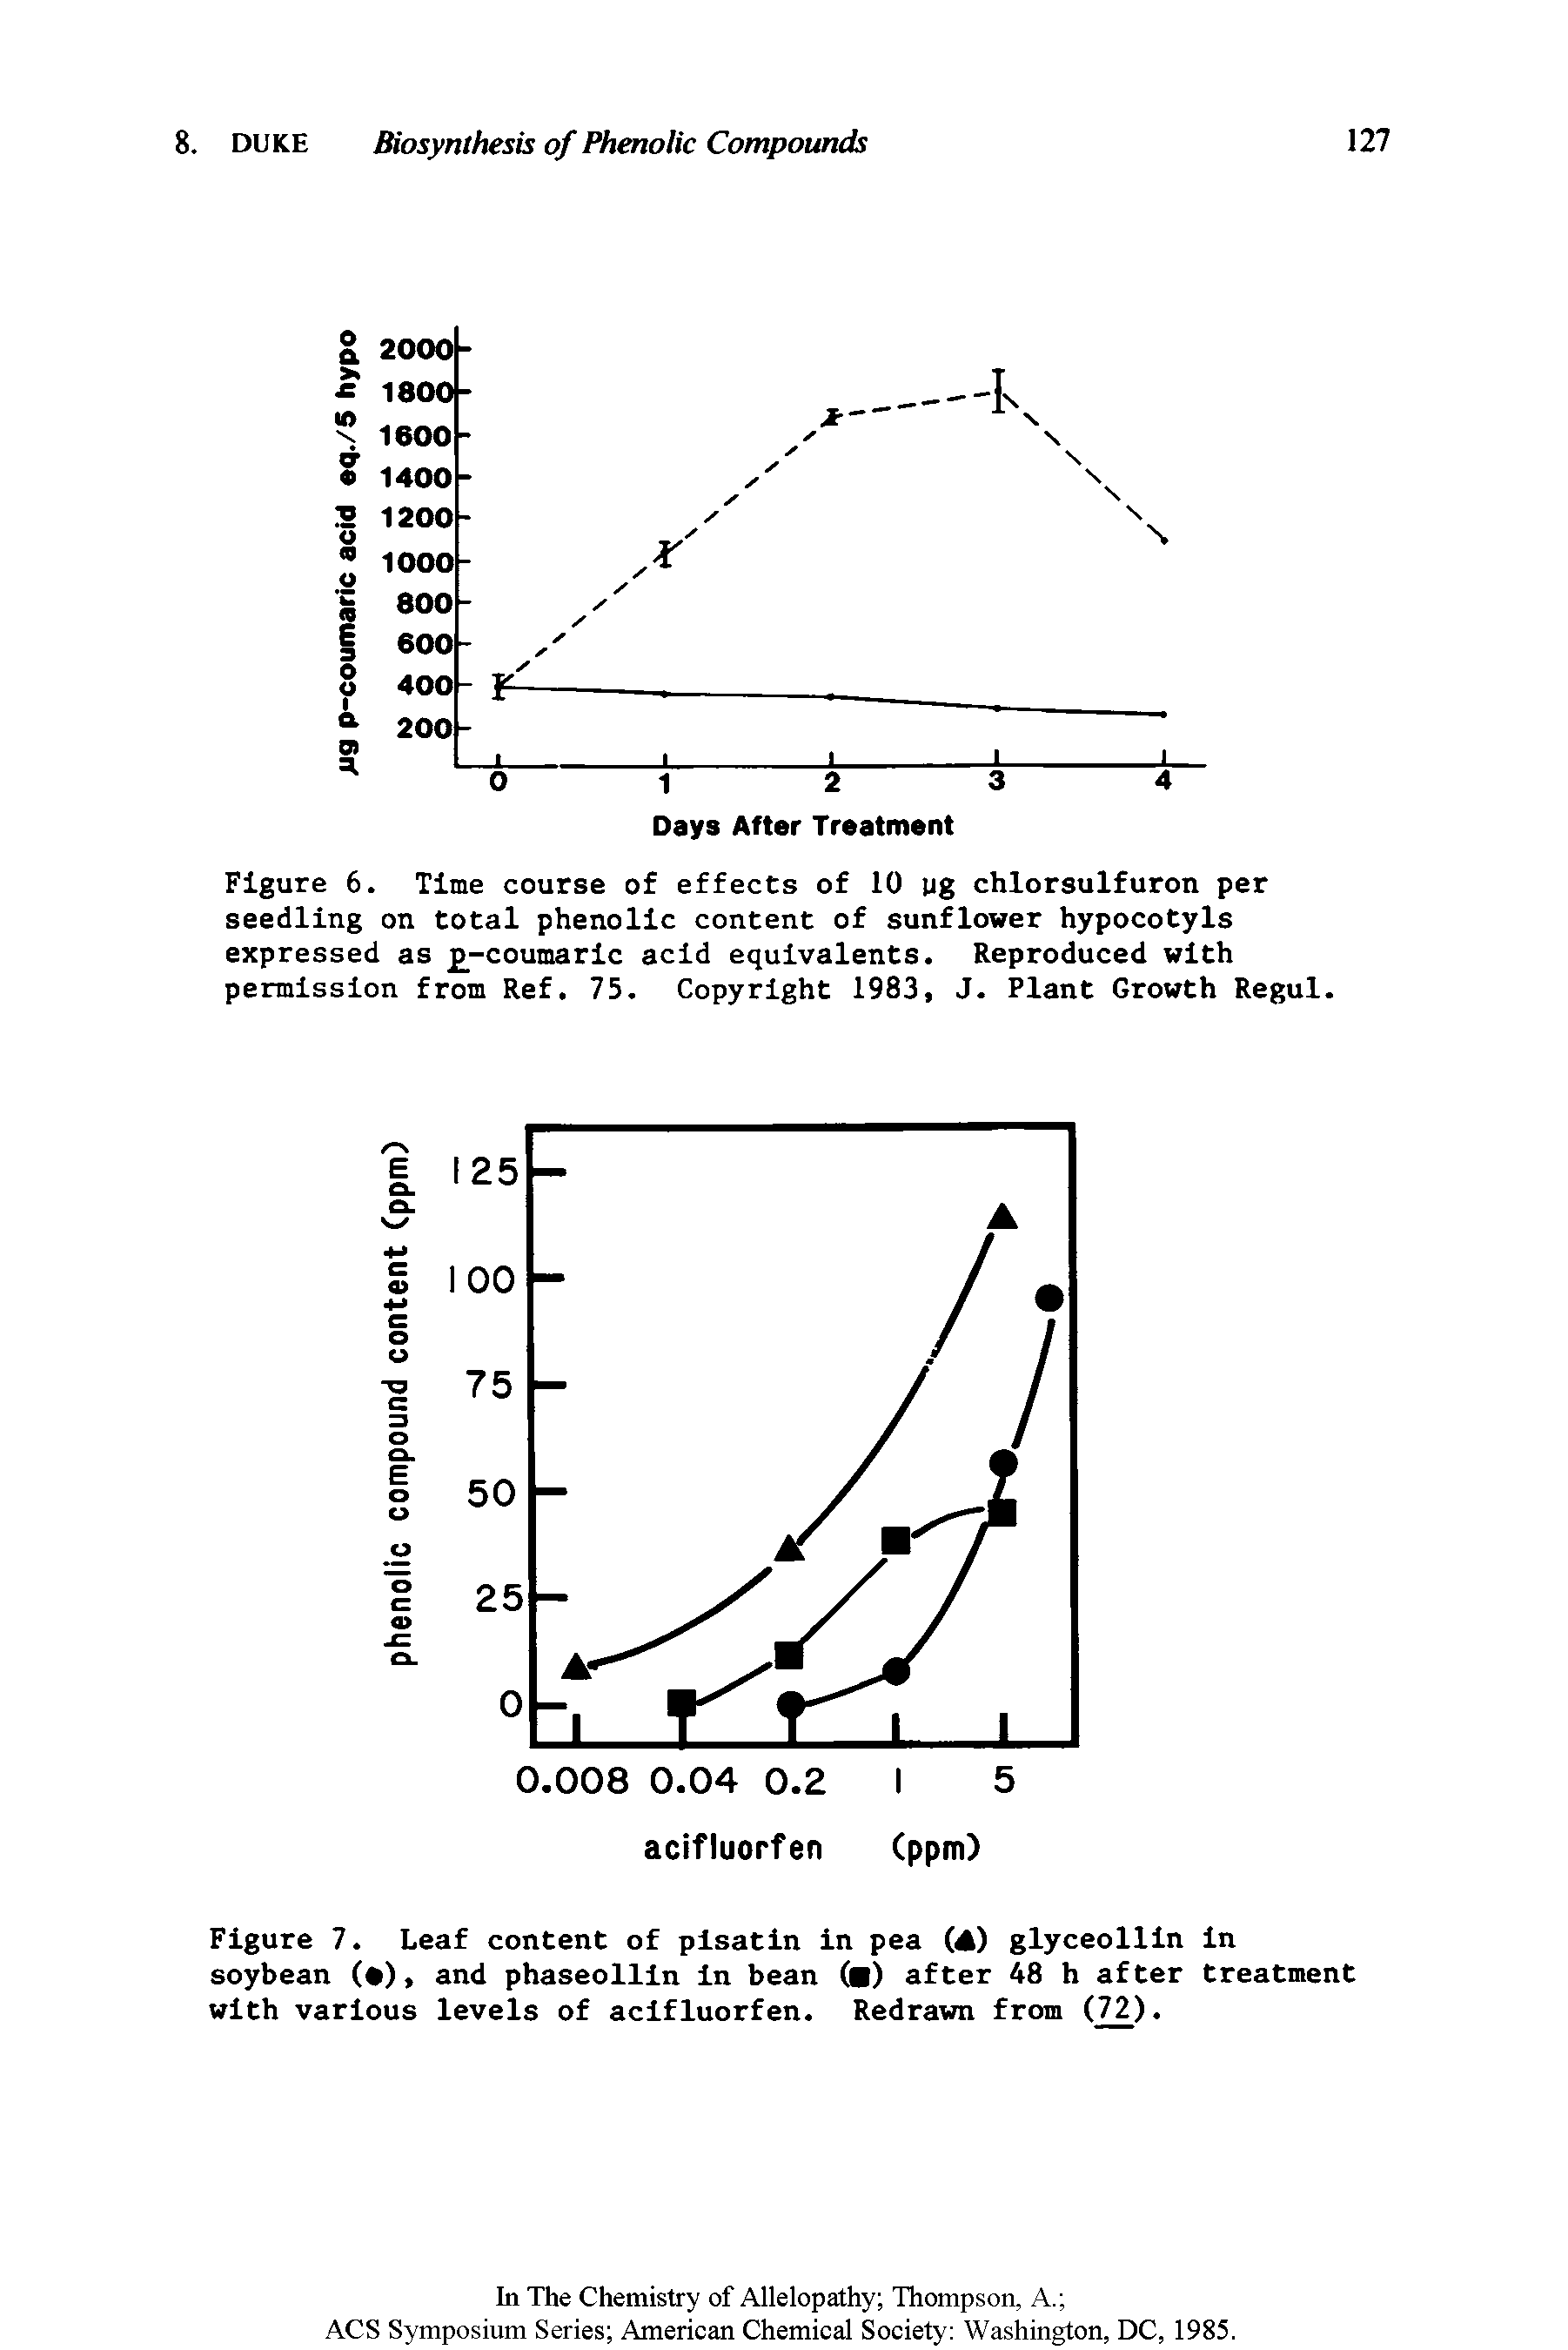 Figure 6. Time course of effects of 10 ug chlorsulfuron per seedling on total phenolic content of sunflower hypocotyls expressed as -coumaric acid equivalents. Reproduced with permission from Ref. 75. Copyright 1983, J. Plant Growth Regul.